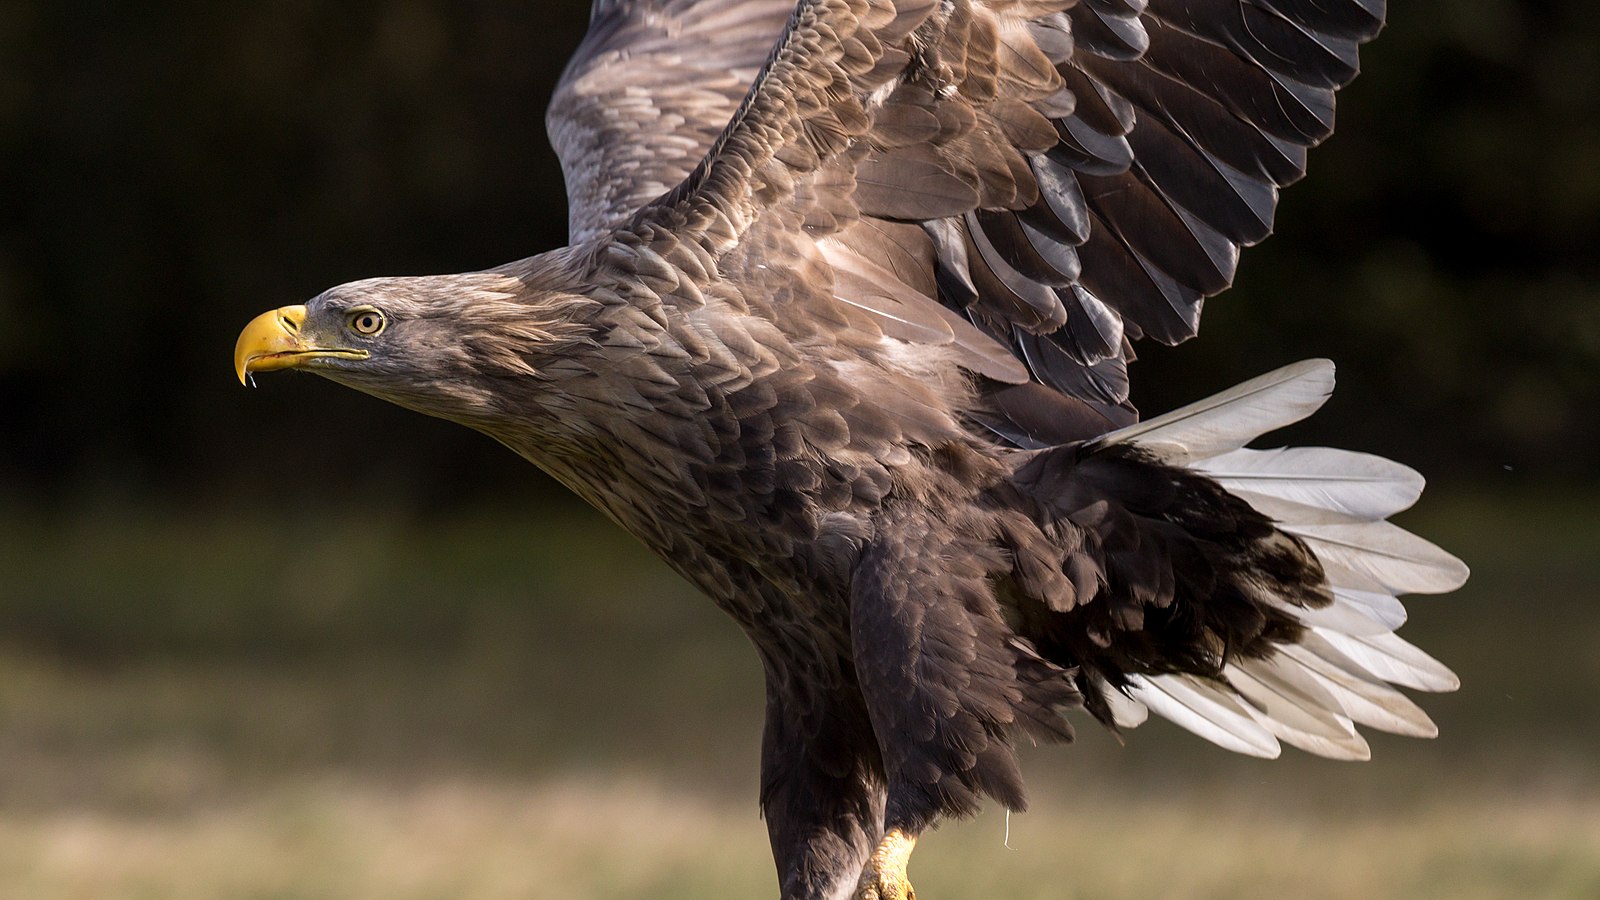 are white tailed eagles cold blooded